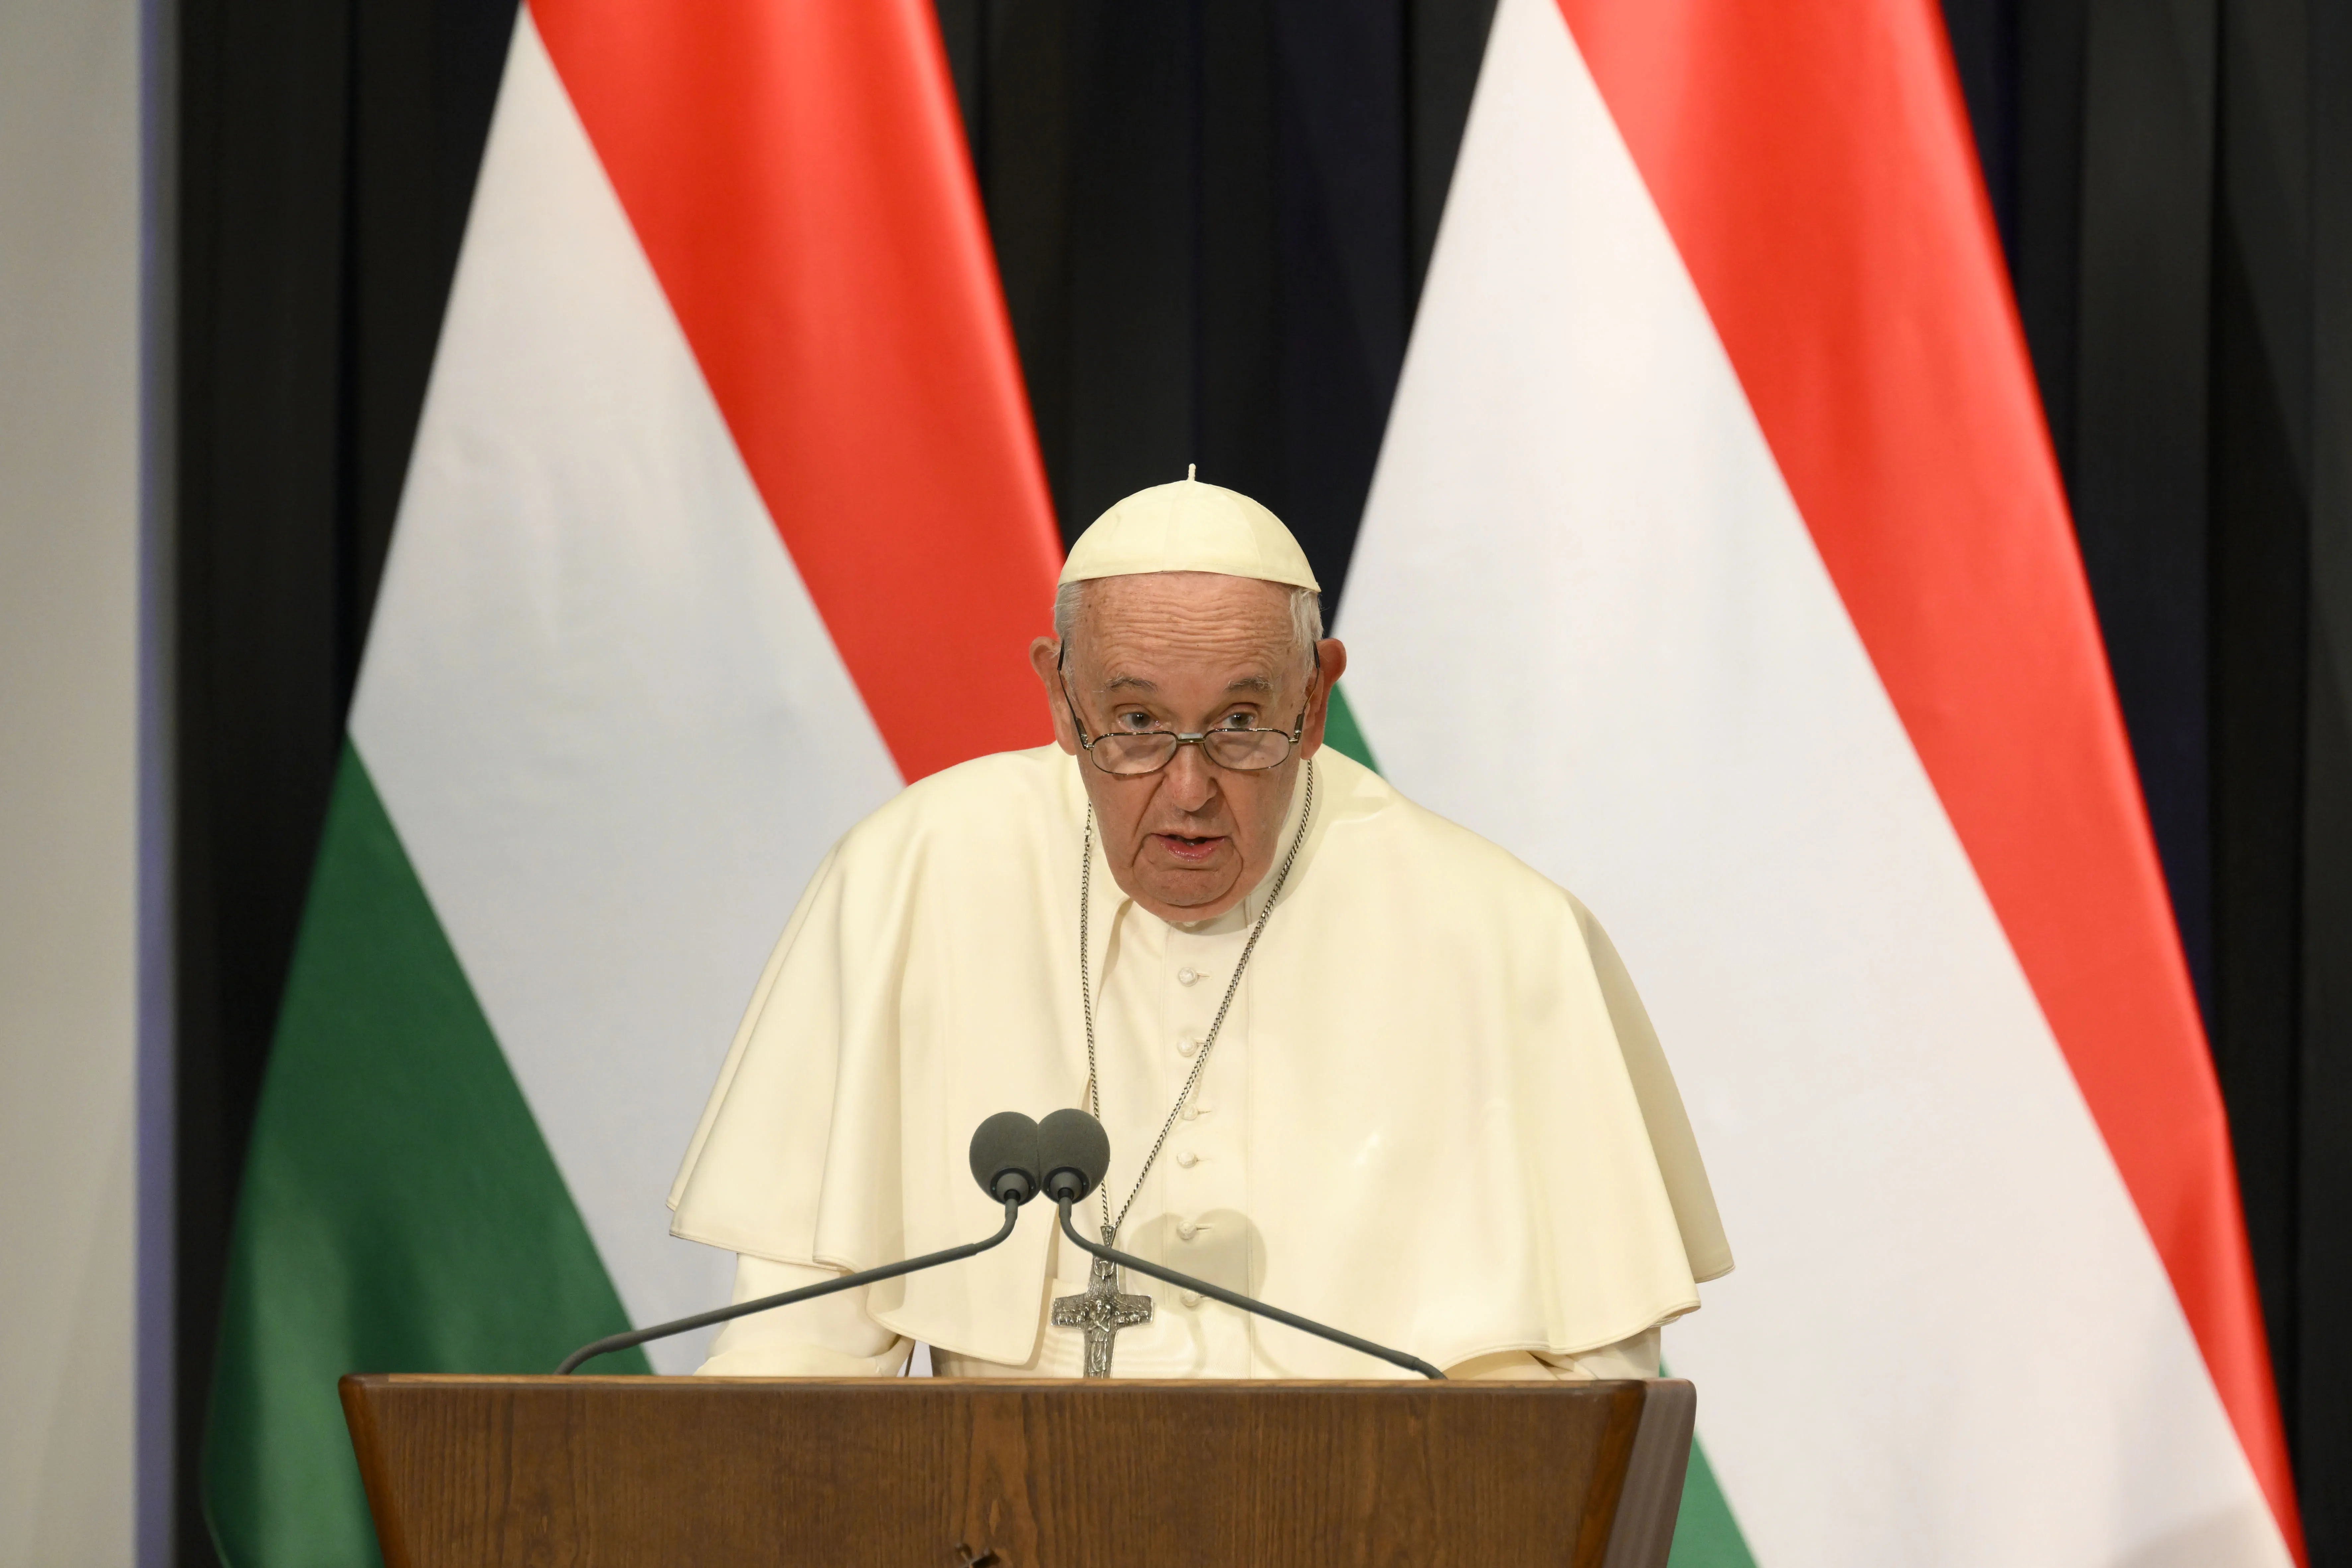 Pope Francis addresses civil authorities and other dignitaries at a former a Carmelite monastery in Budapest, Hungary, on April 28, 2023, on the first day of his three-day pilgrimage to the country.?w=200&h=150